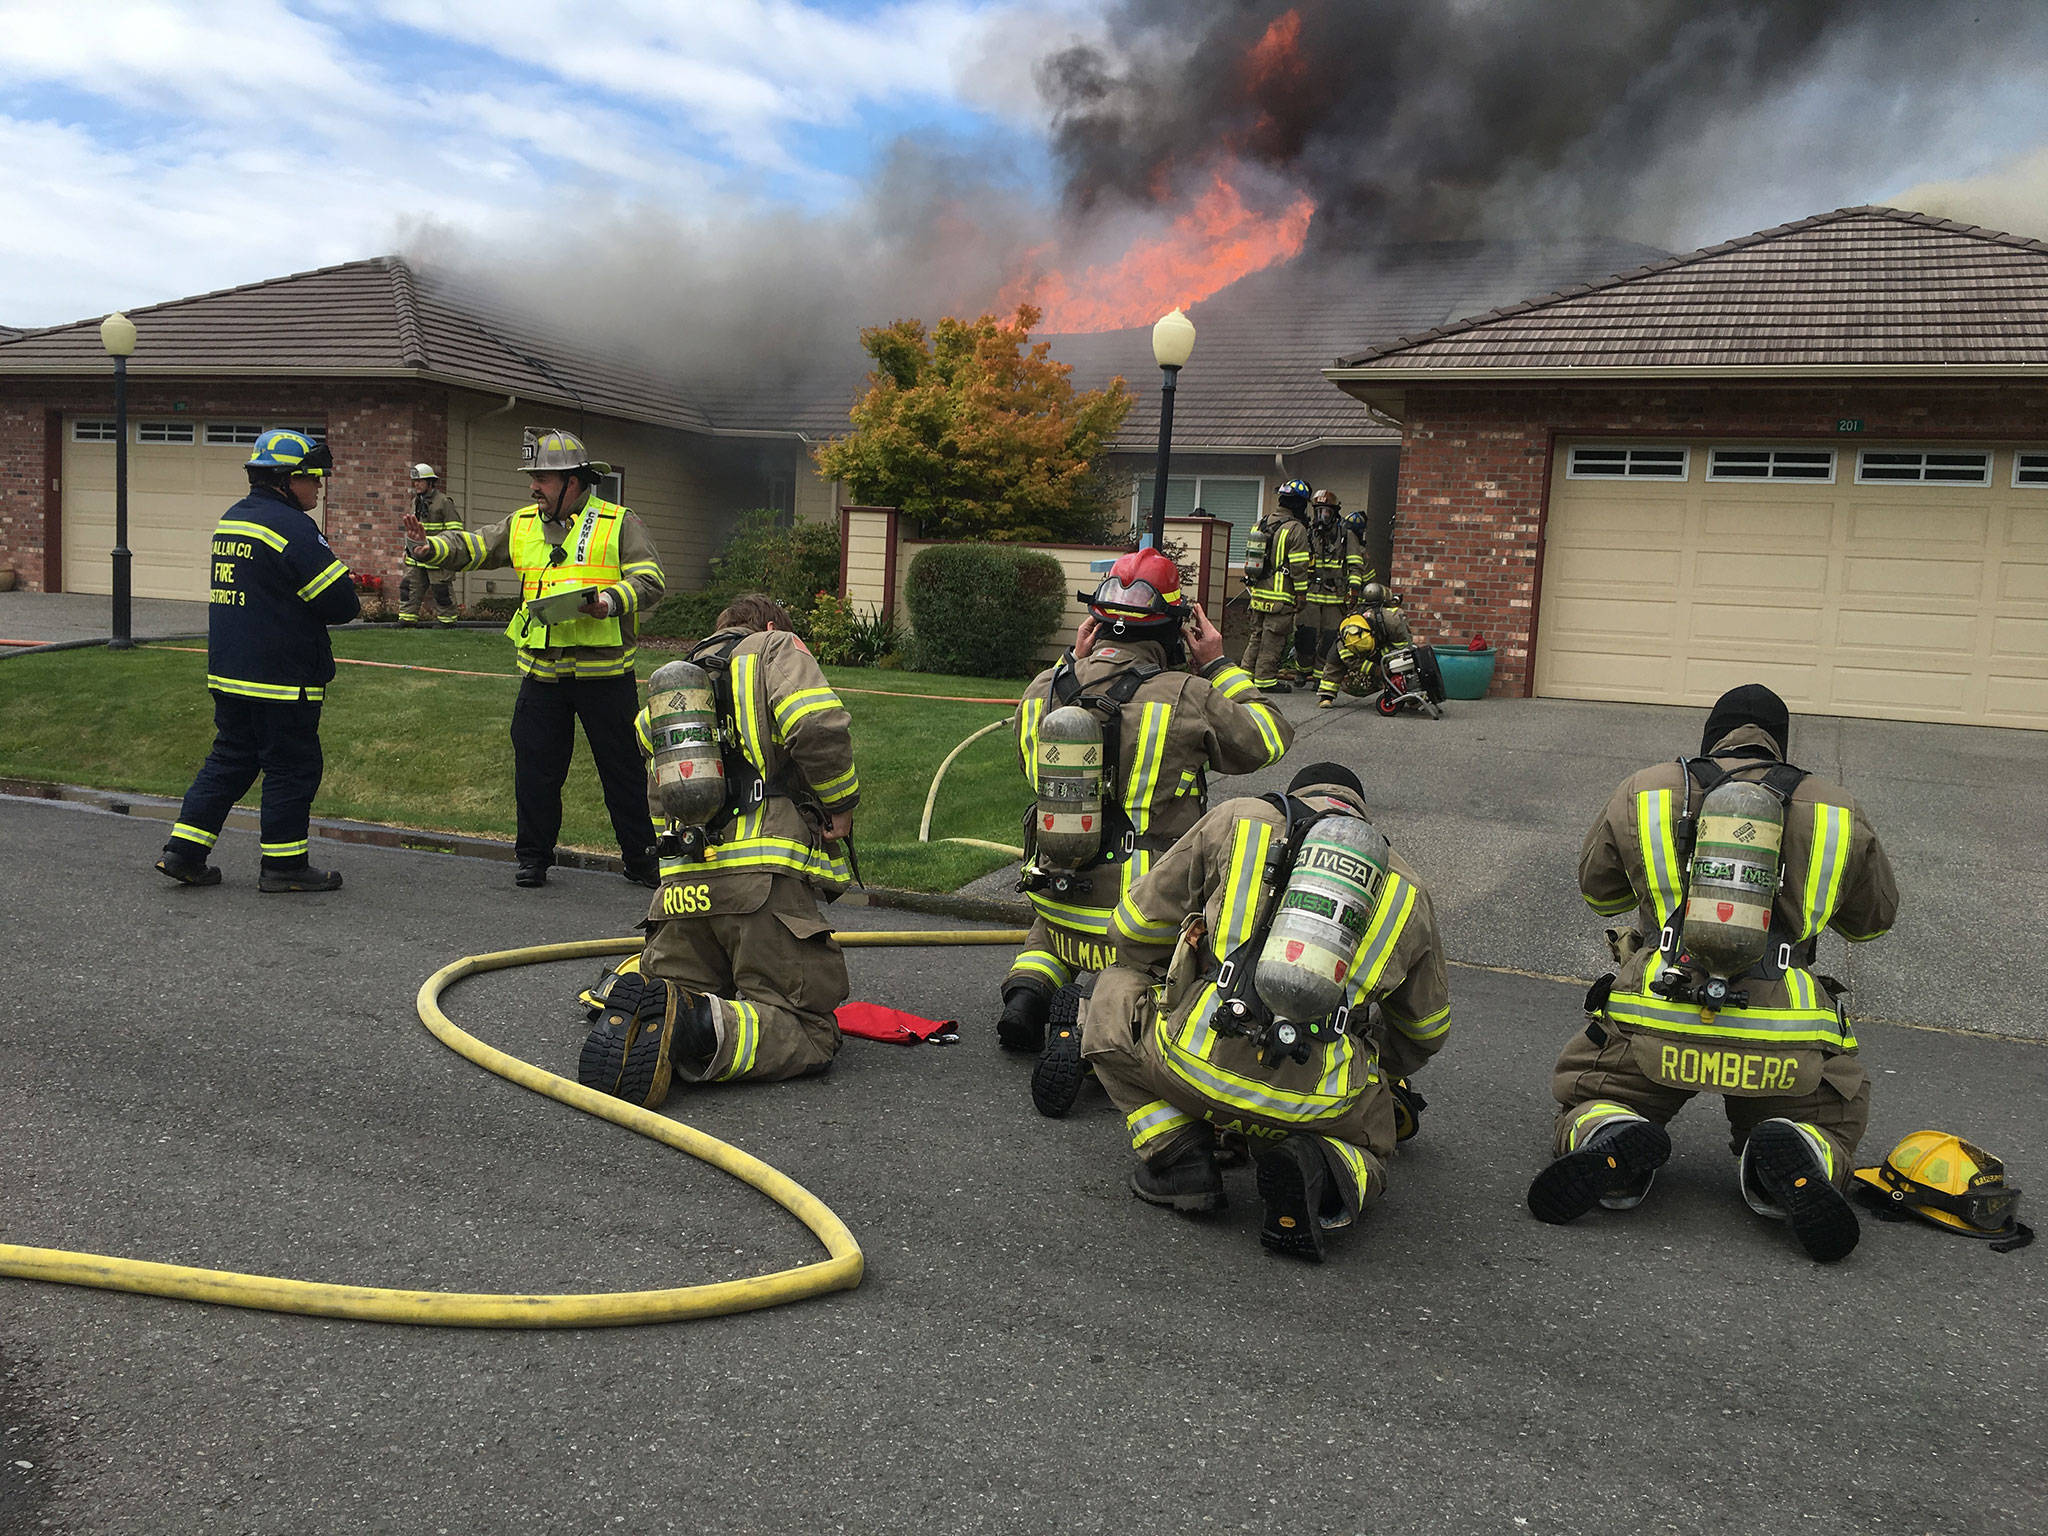 Fire crews with Clallam County Fire District 3 ready to enter a duplex fire on July 20 in Sunland North. The fire was reported to 9-1-1 around 4 p.m. Thursday but a cause has not been determined as of July 21. Sequim Gazette photos by Matthew Nash